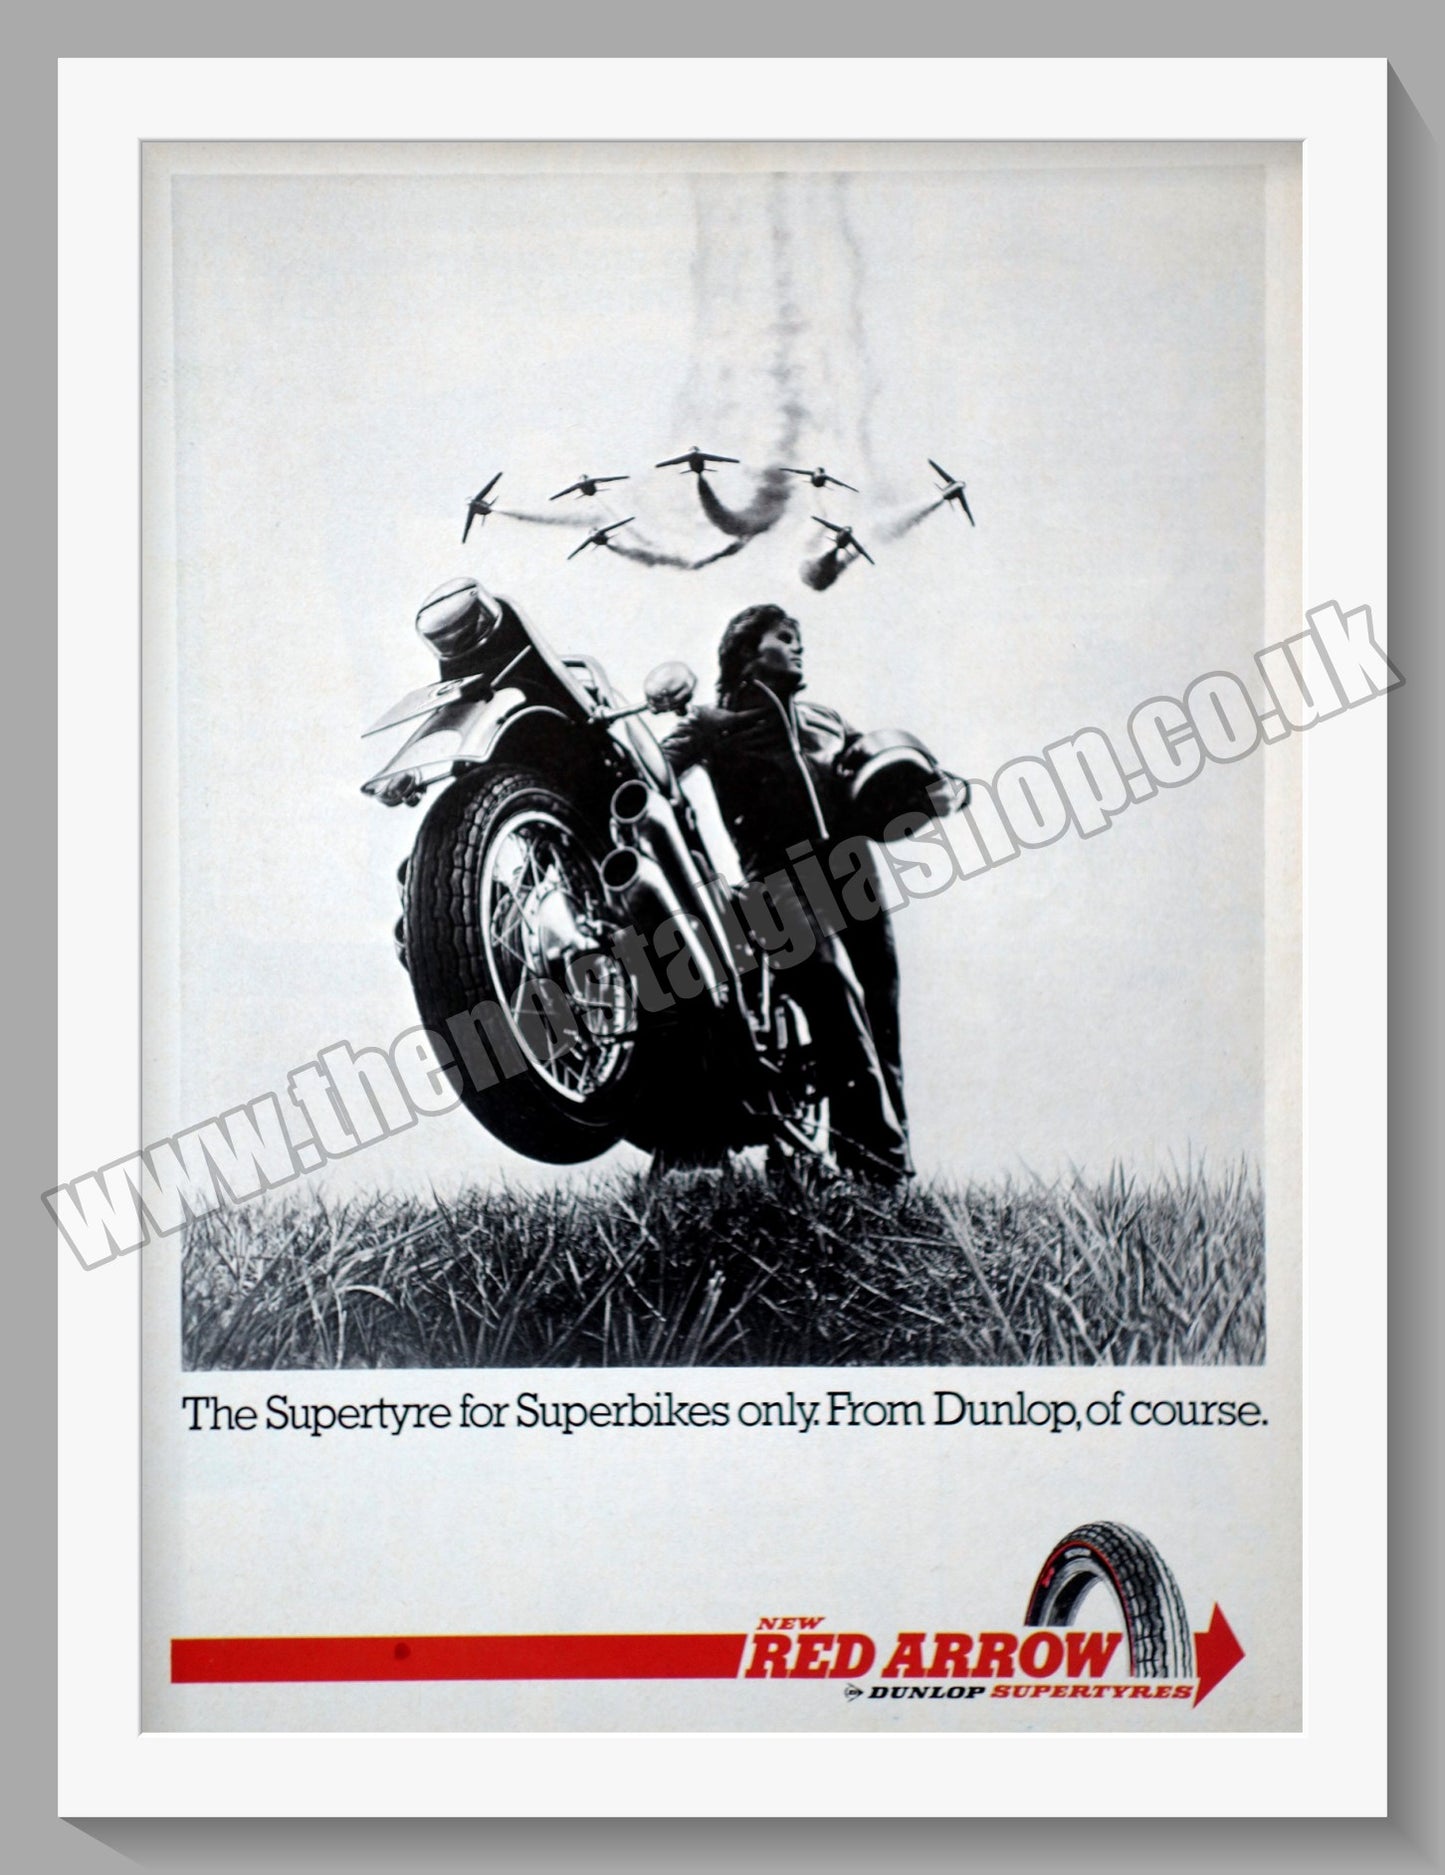 Dunlop Motorcycle Tyres with The Red Arrows. Original Advert 1975 (ref AD57726)